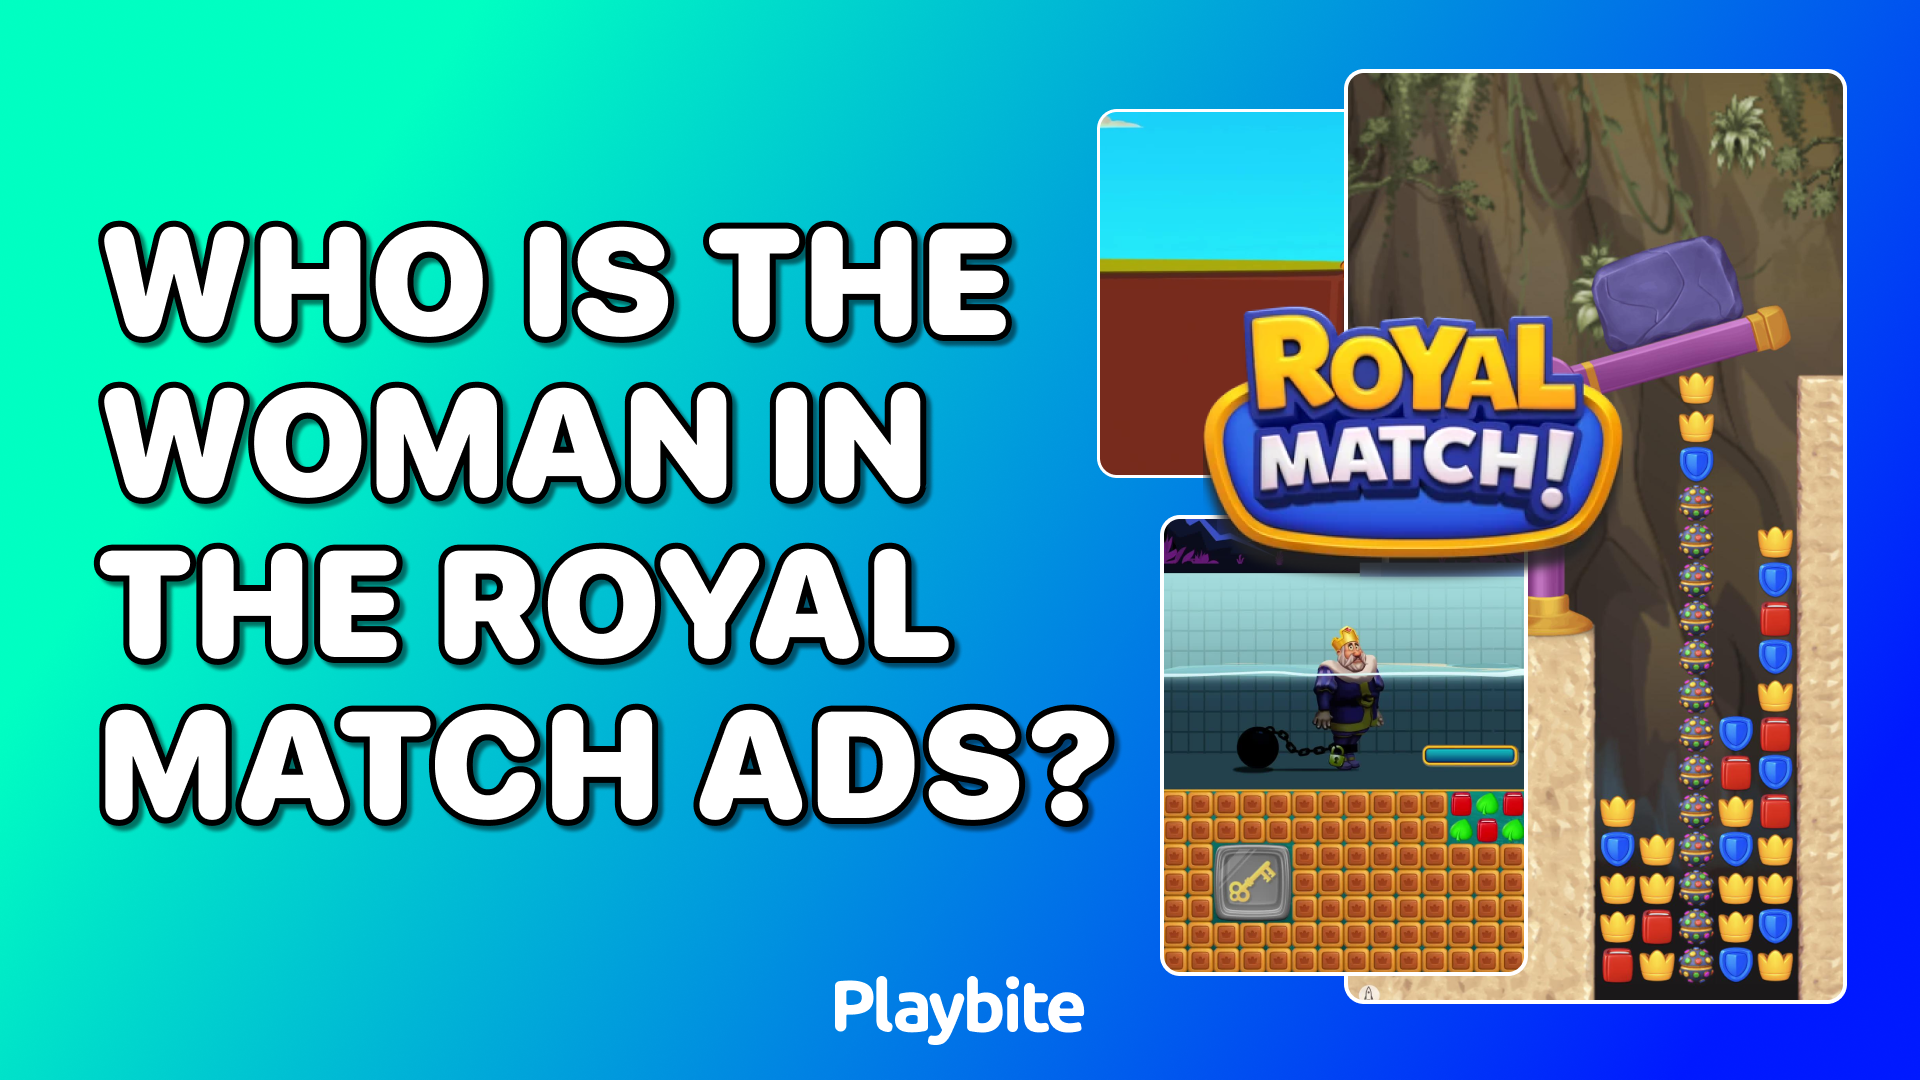 Who Is the Woman in the Royal Match Ads?